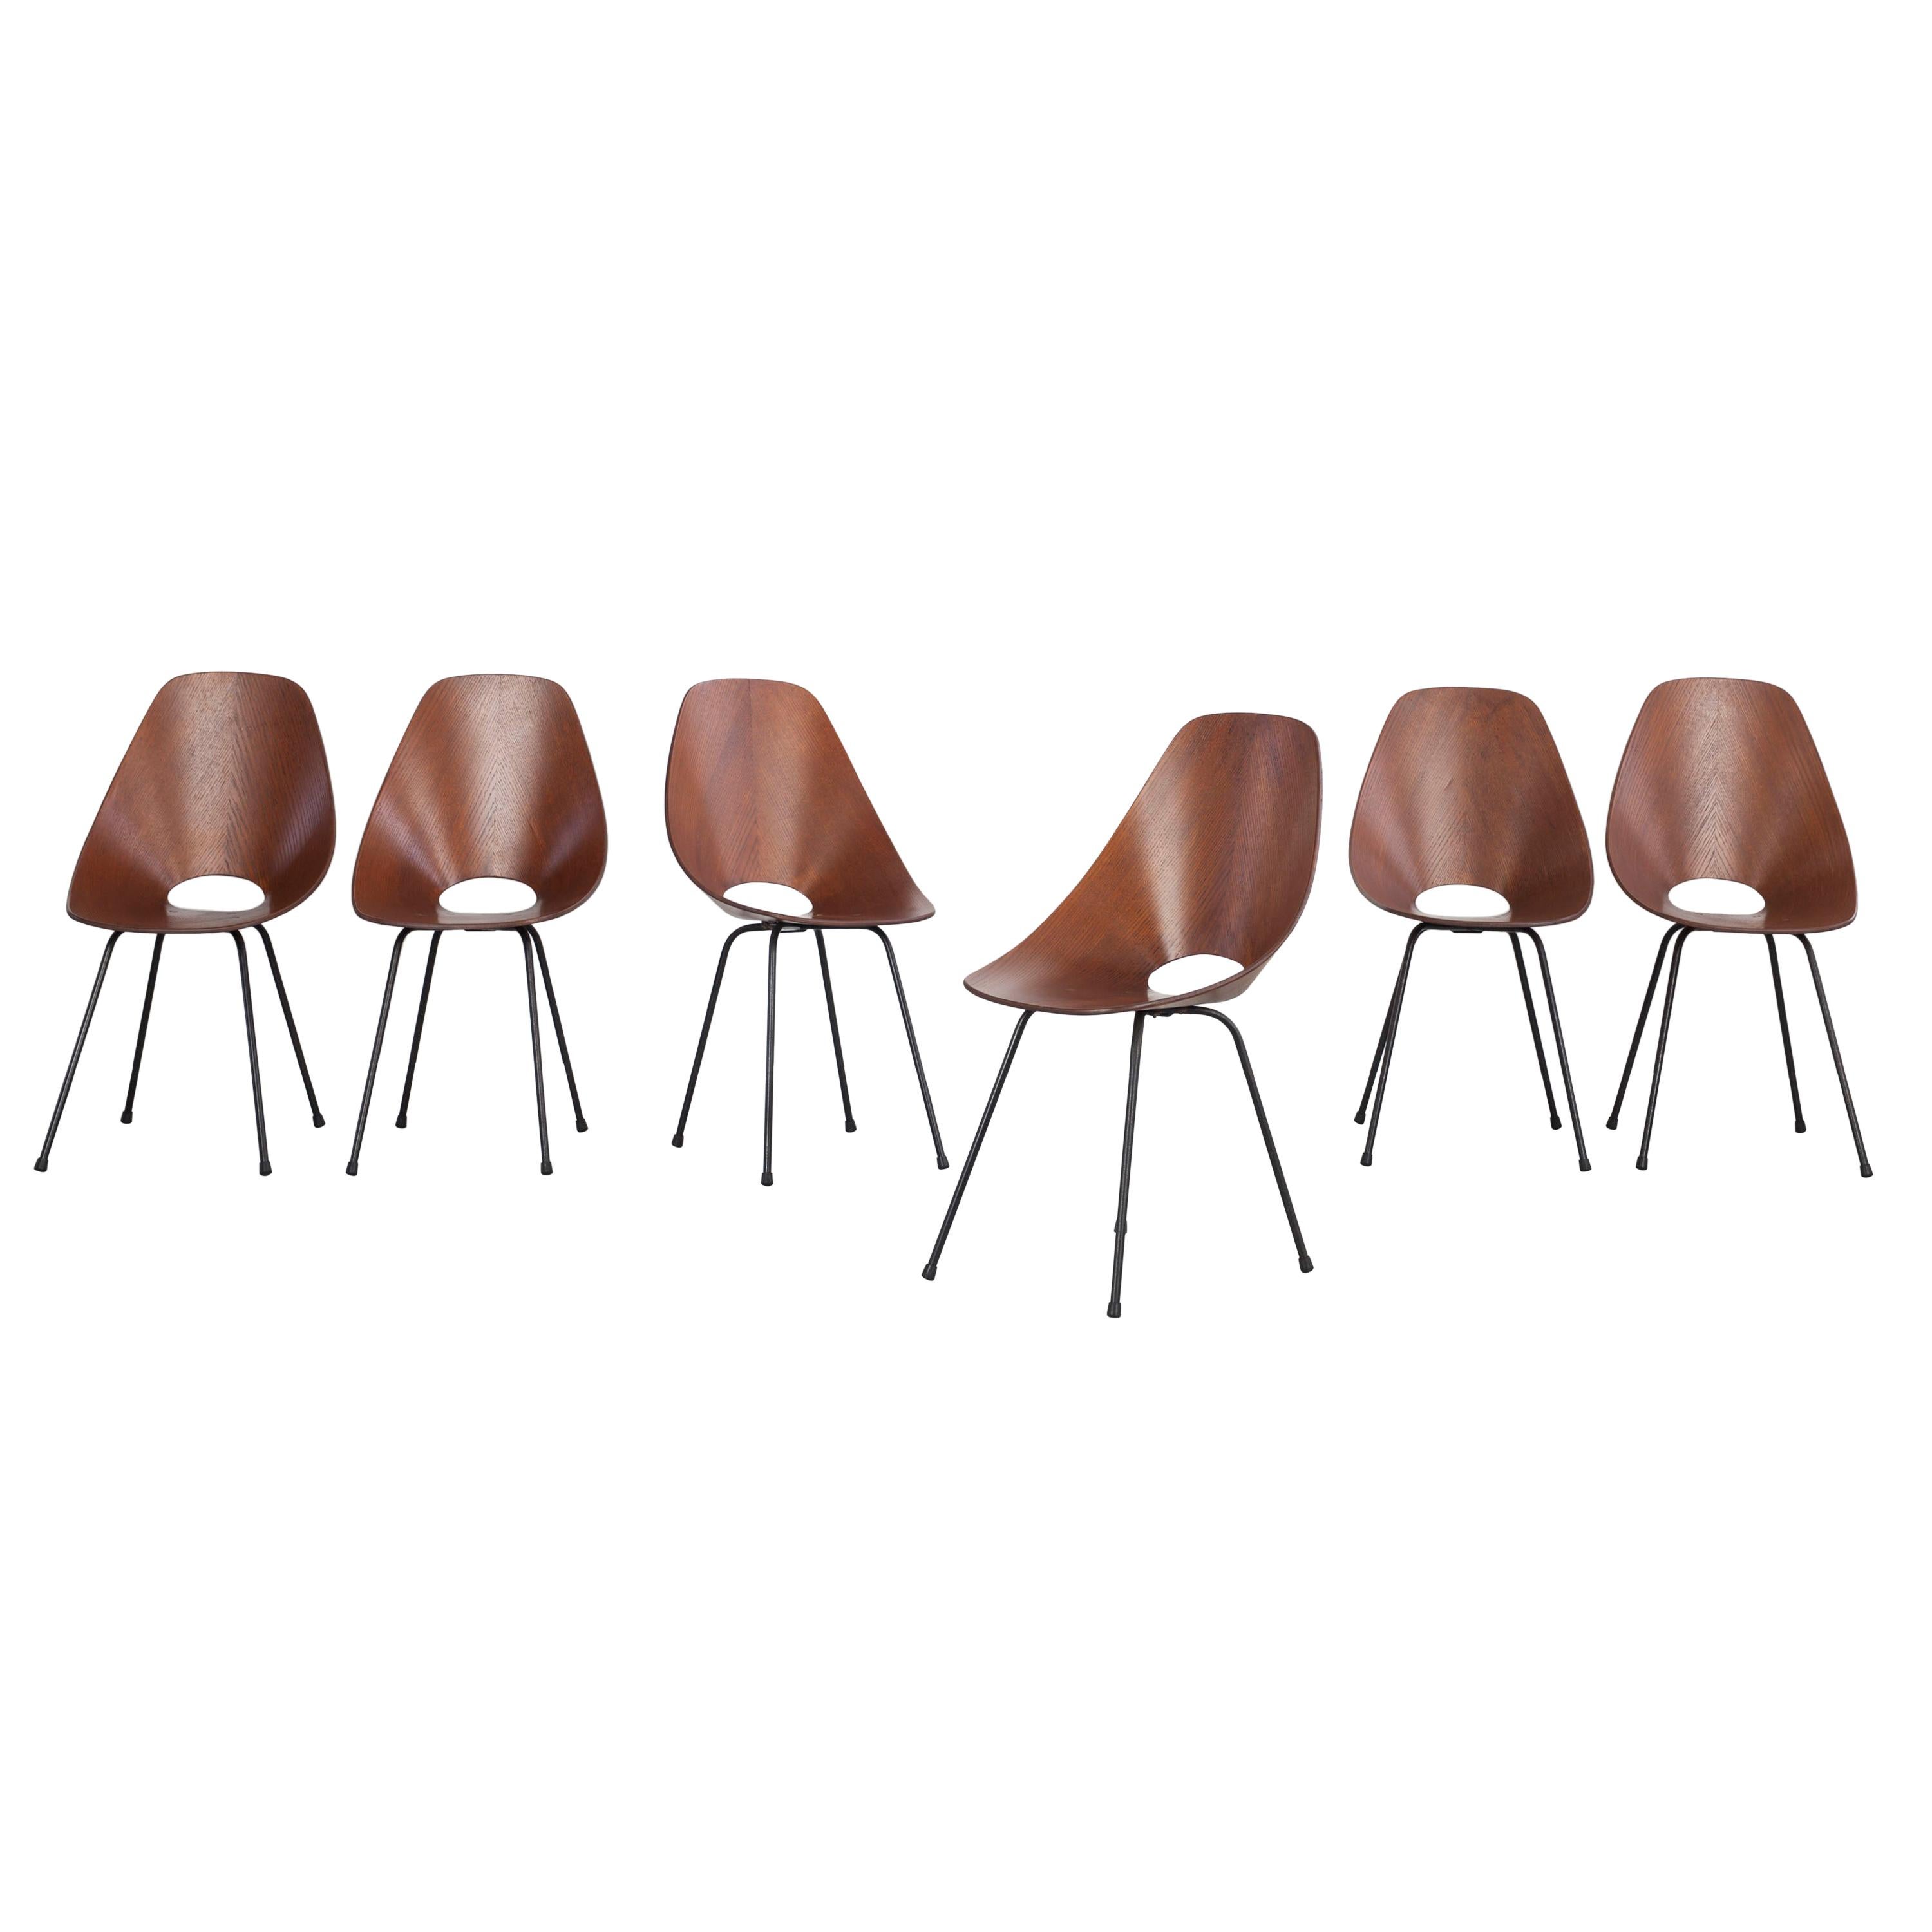 Set of 6 Vittorio Nobili Medea Plywood Chairs from Italy, 1954